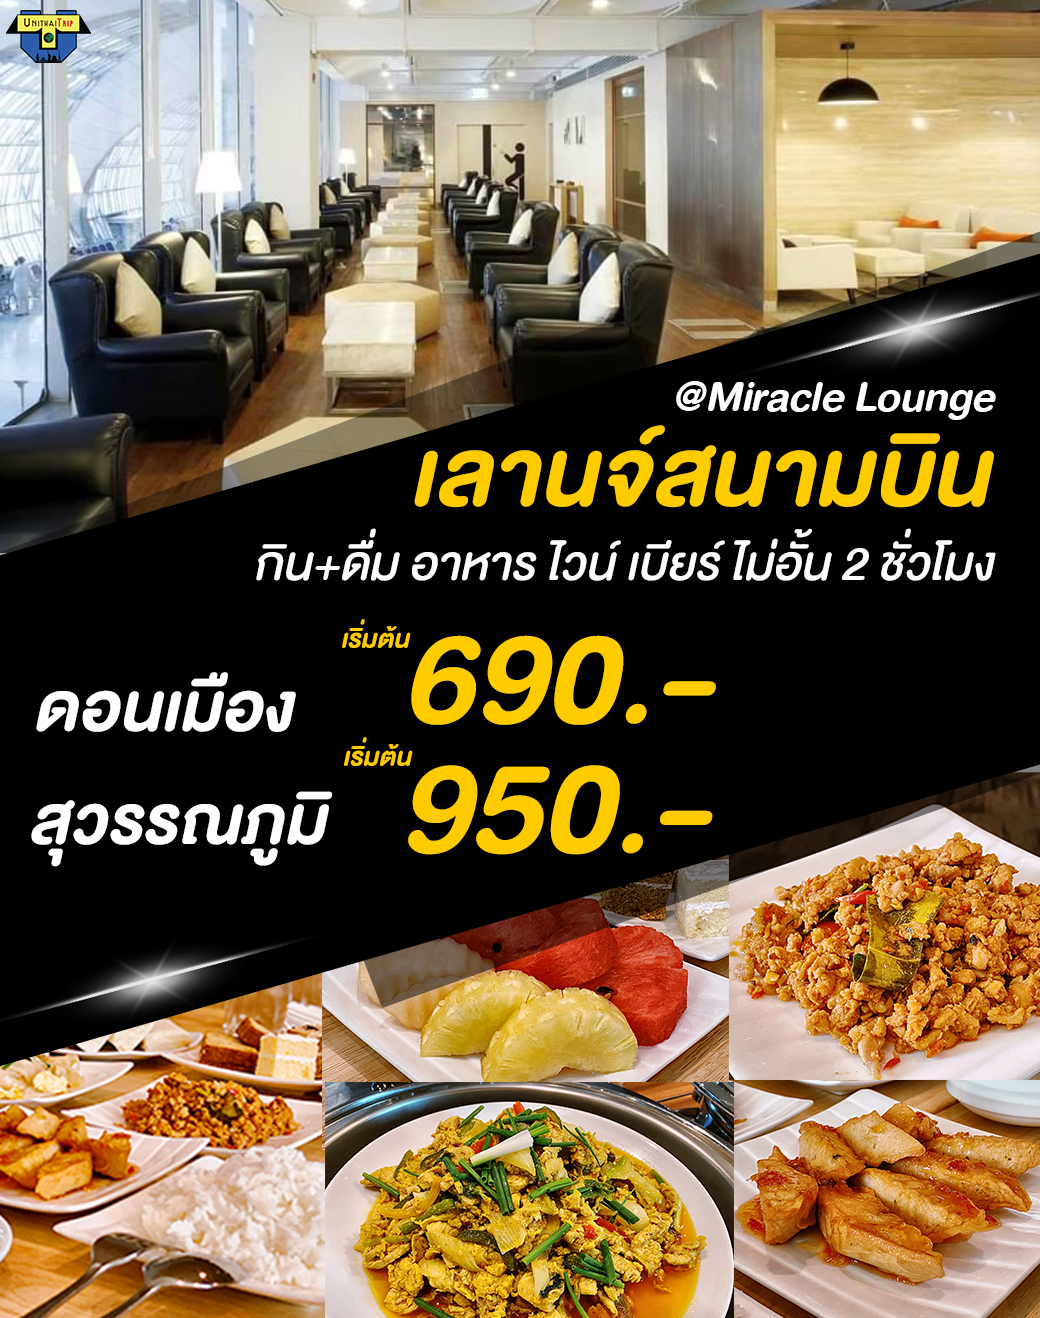 Miracle Lounge by Unithai